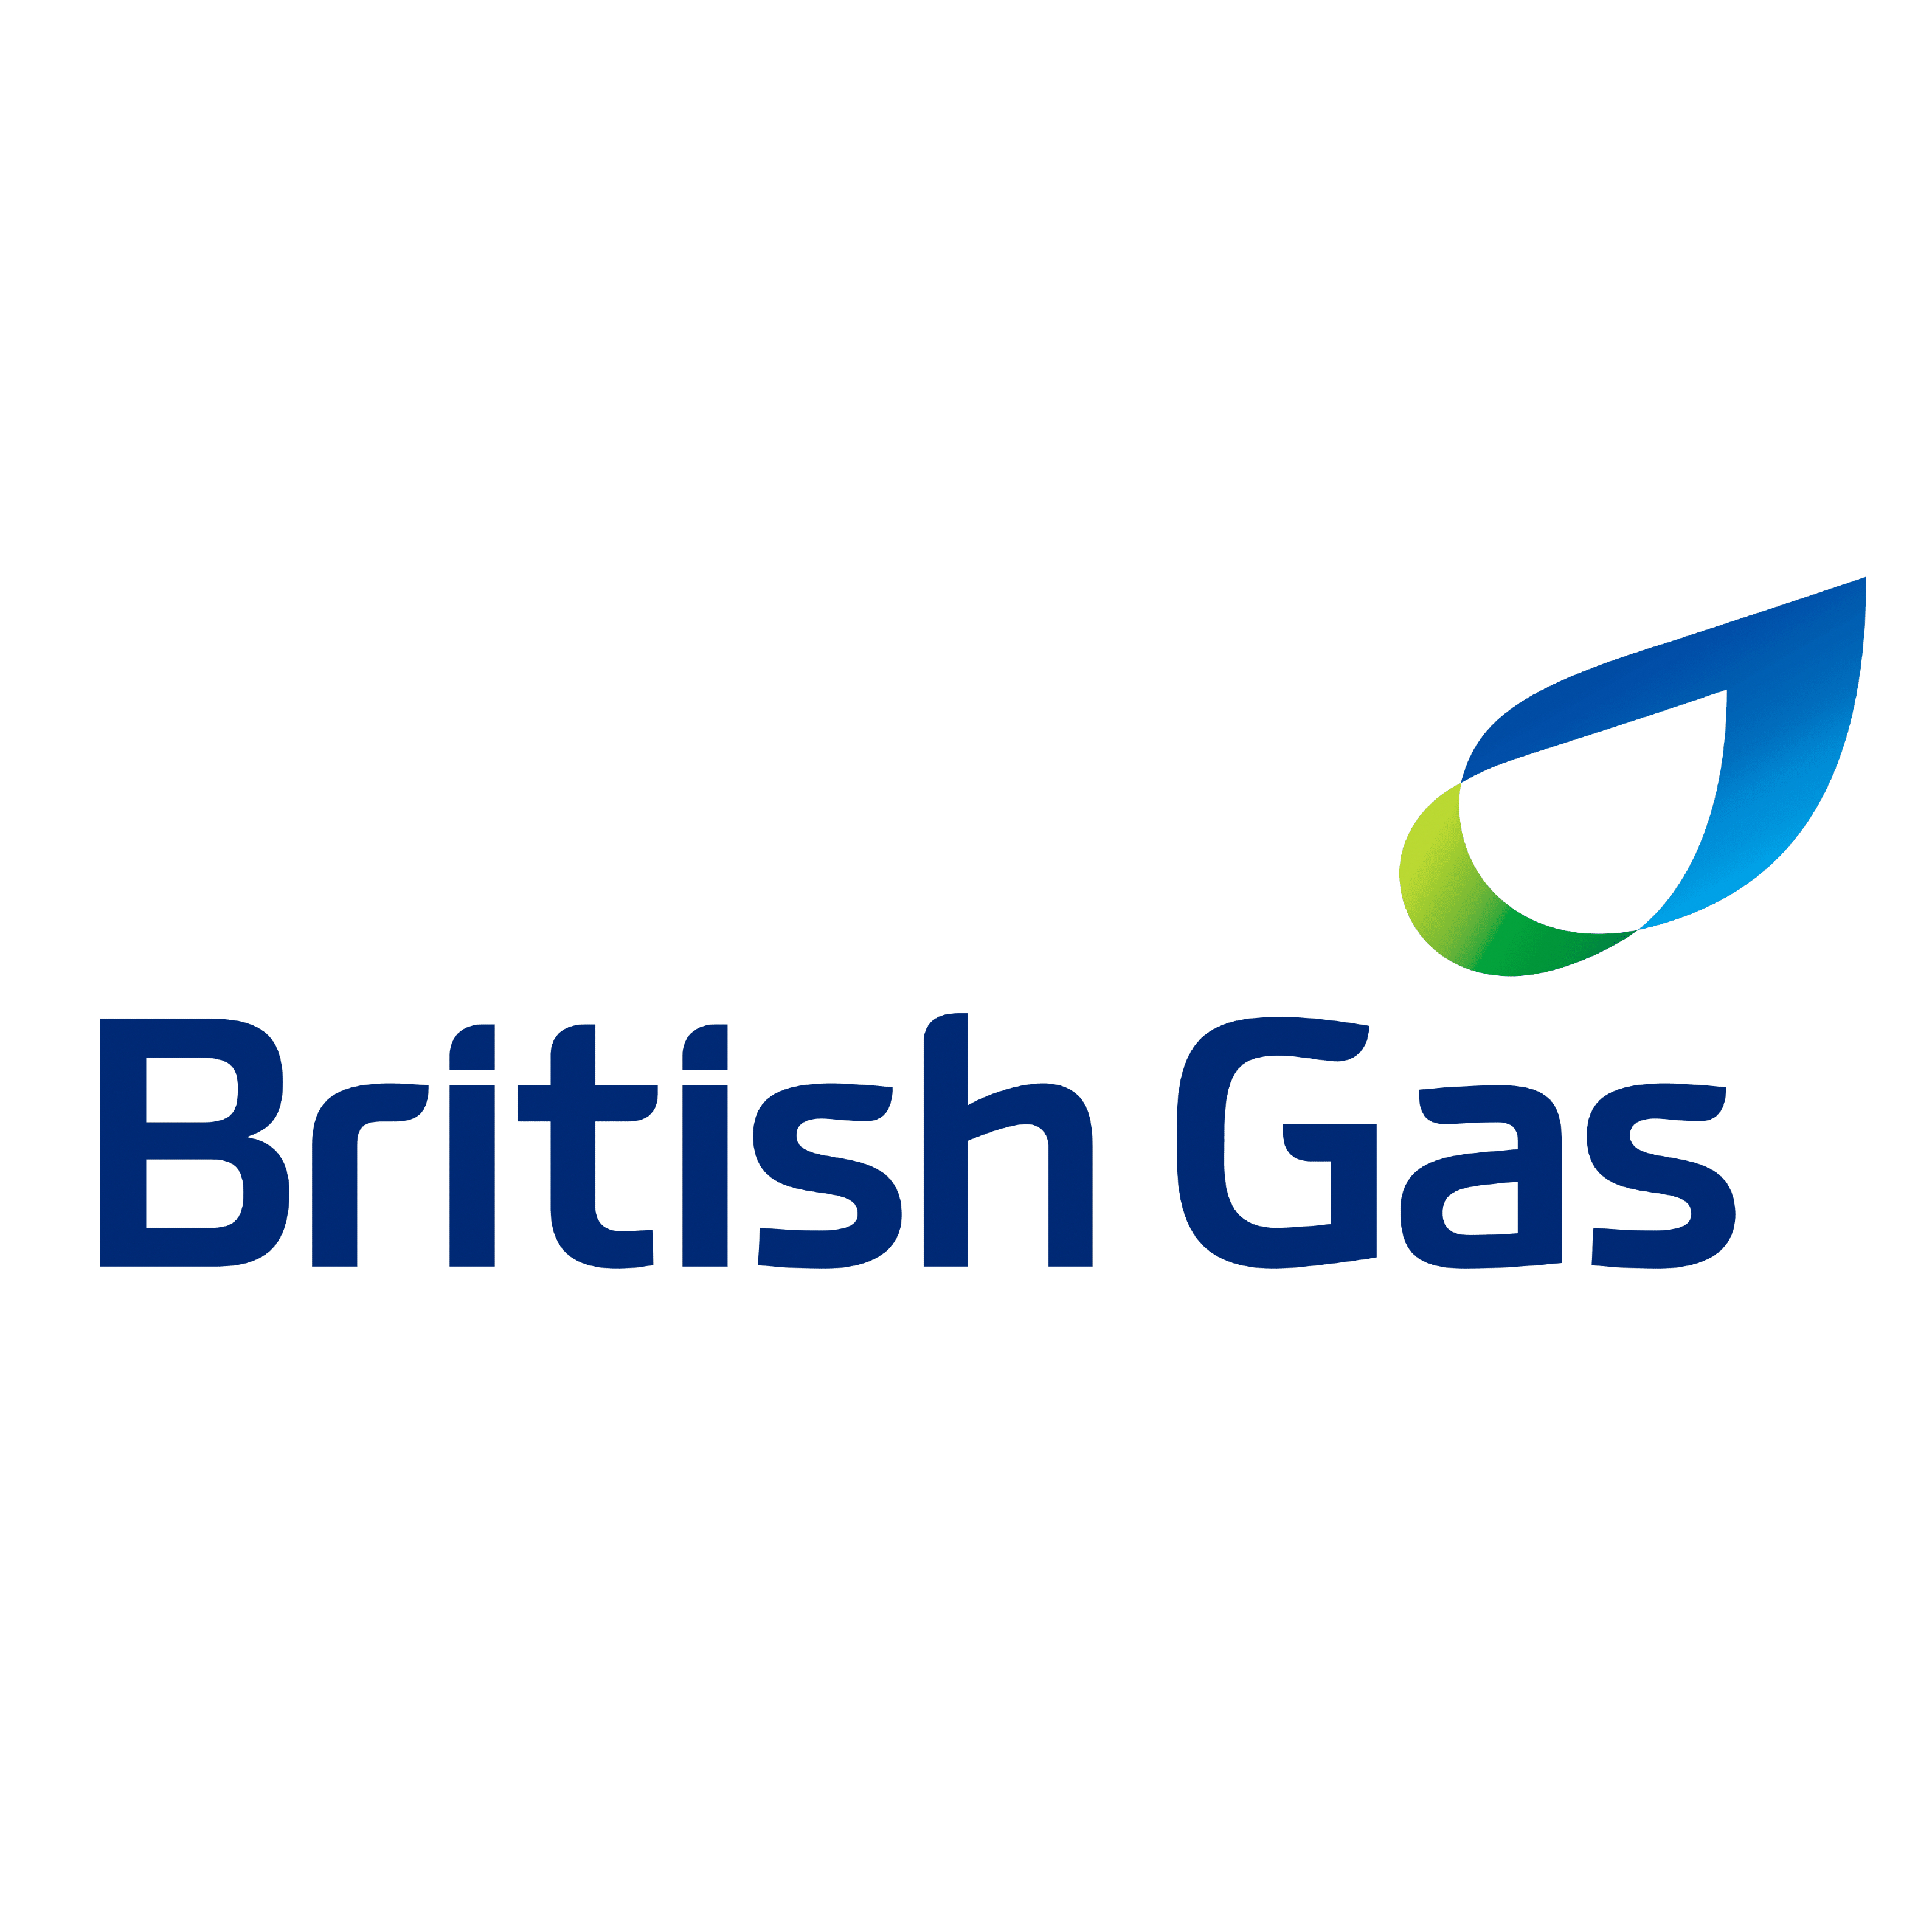 Struggling with energy bill debt? Check if you can get a grant of up to £1,500 from British Gas – even if you're not a customer